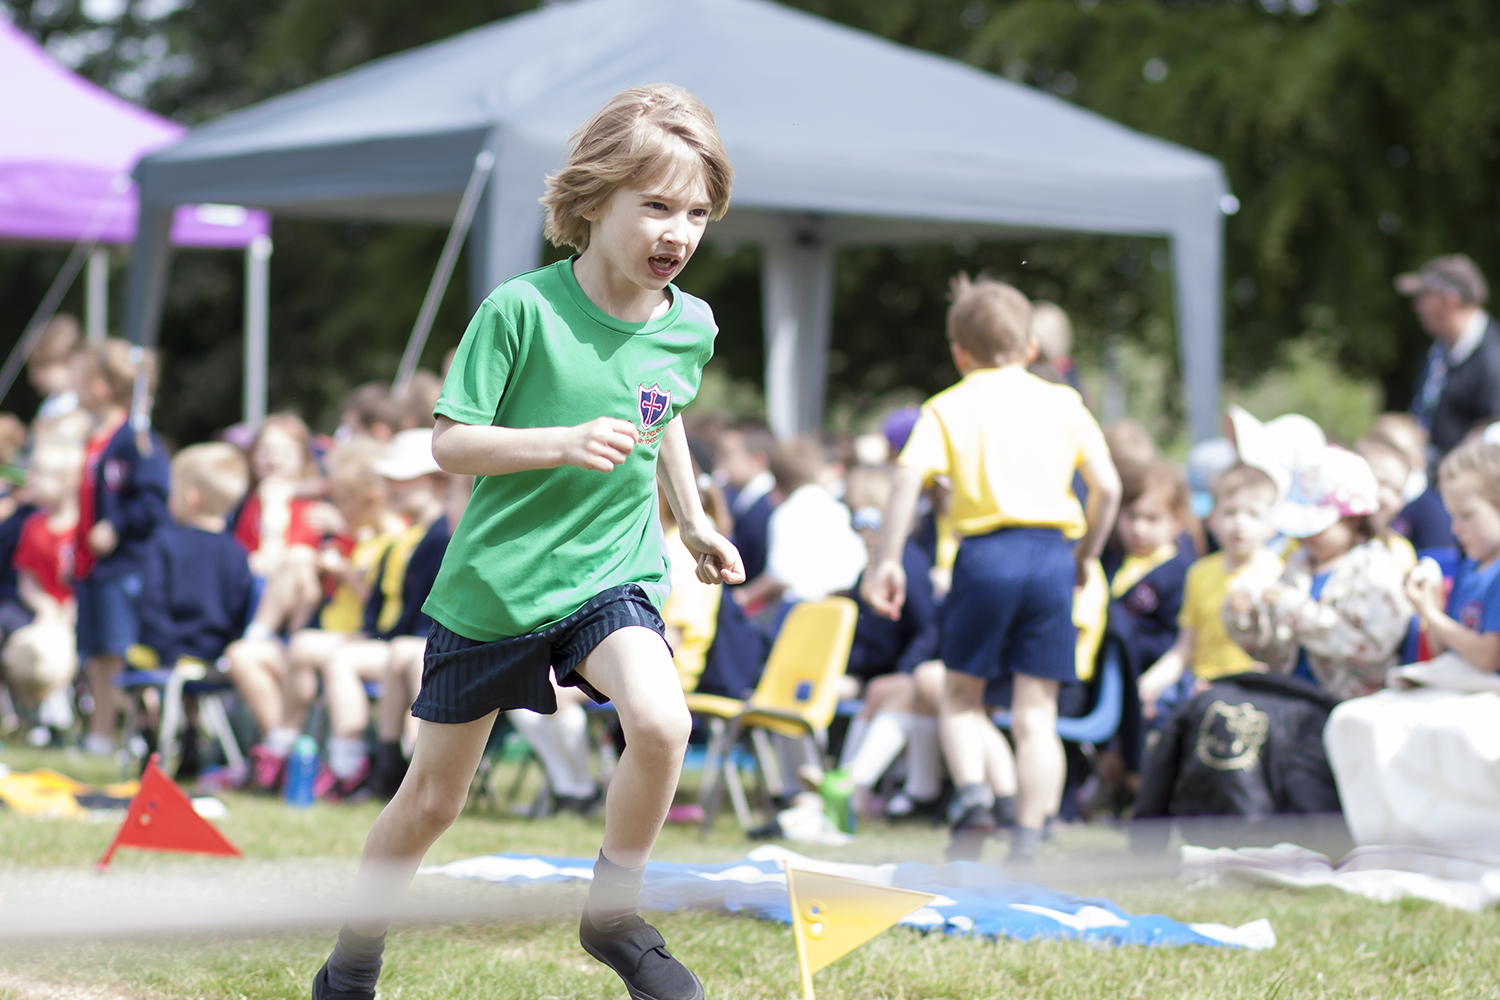 Toby racing for the finish line in the obstacle race at school sports day